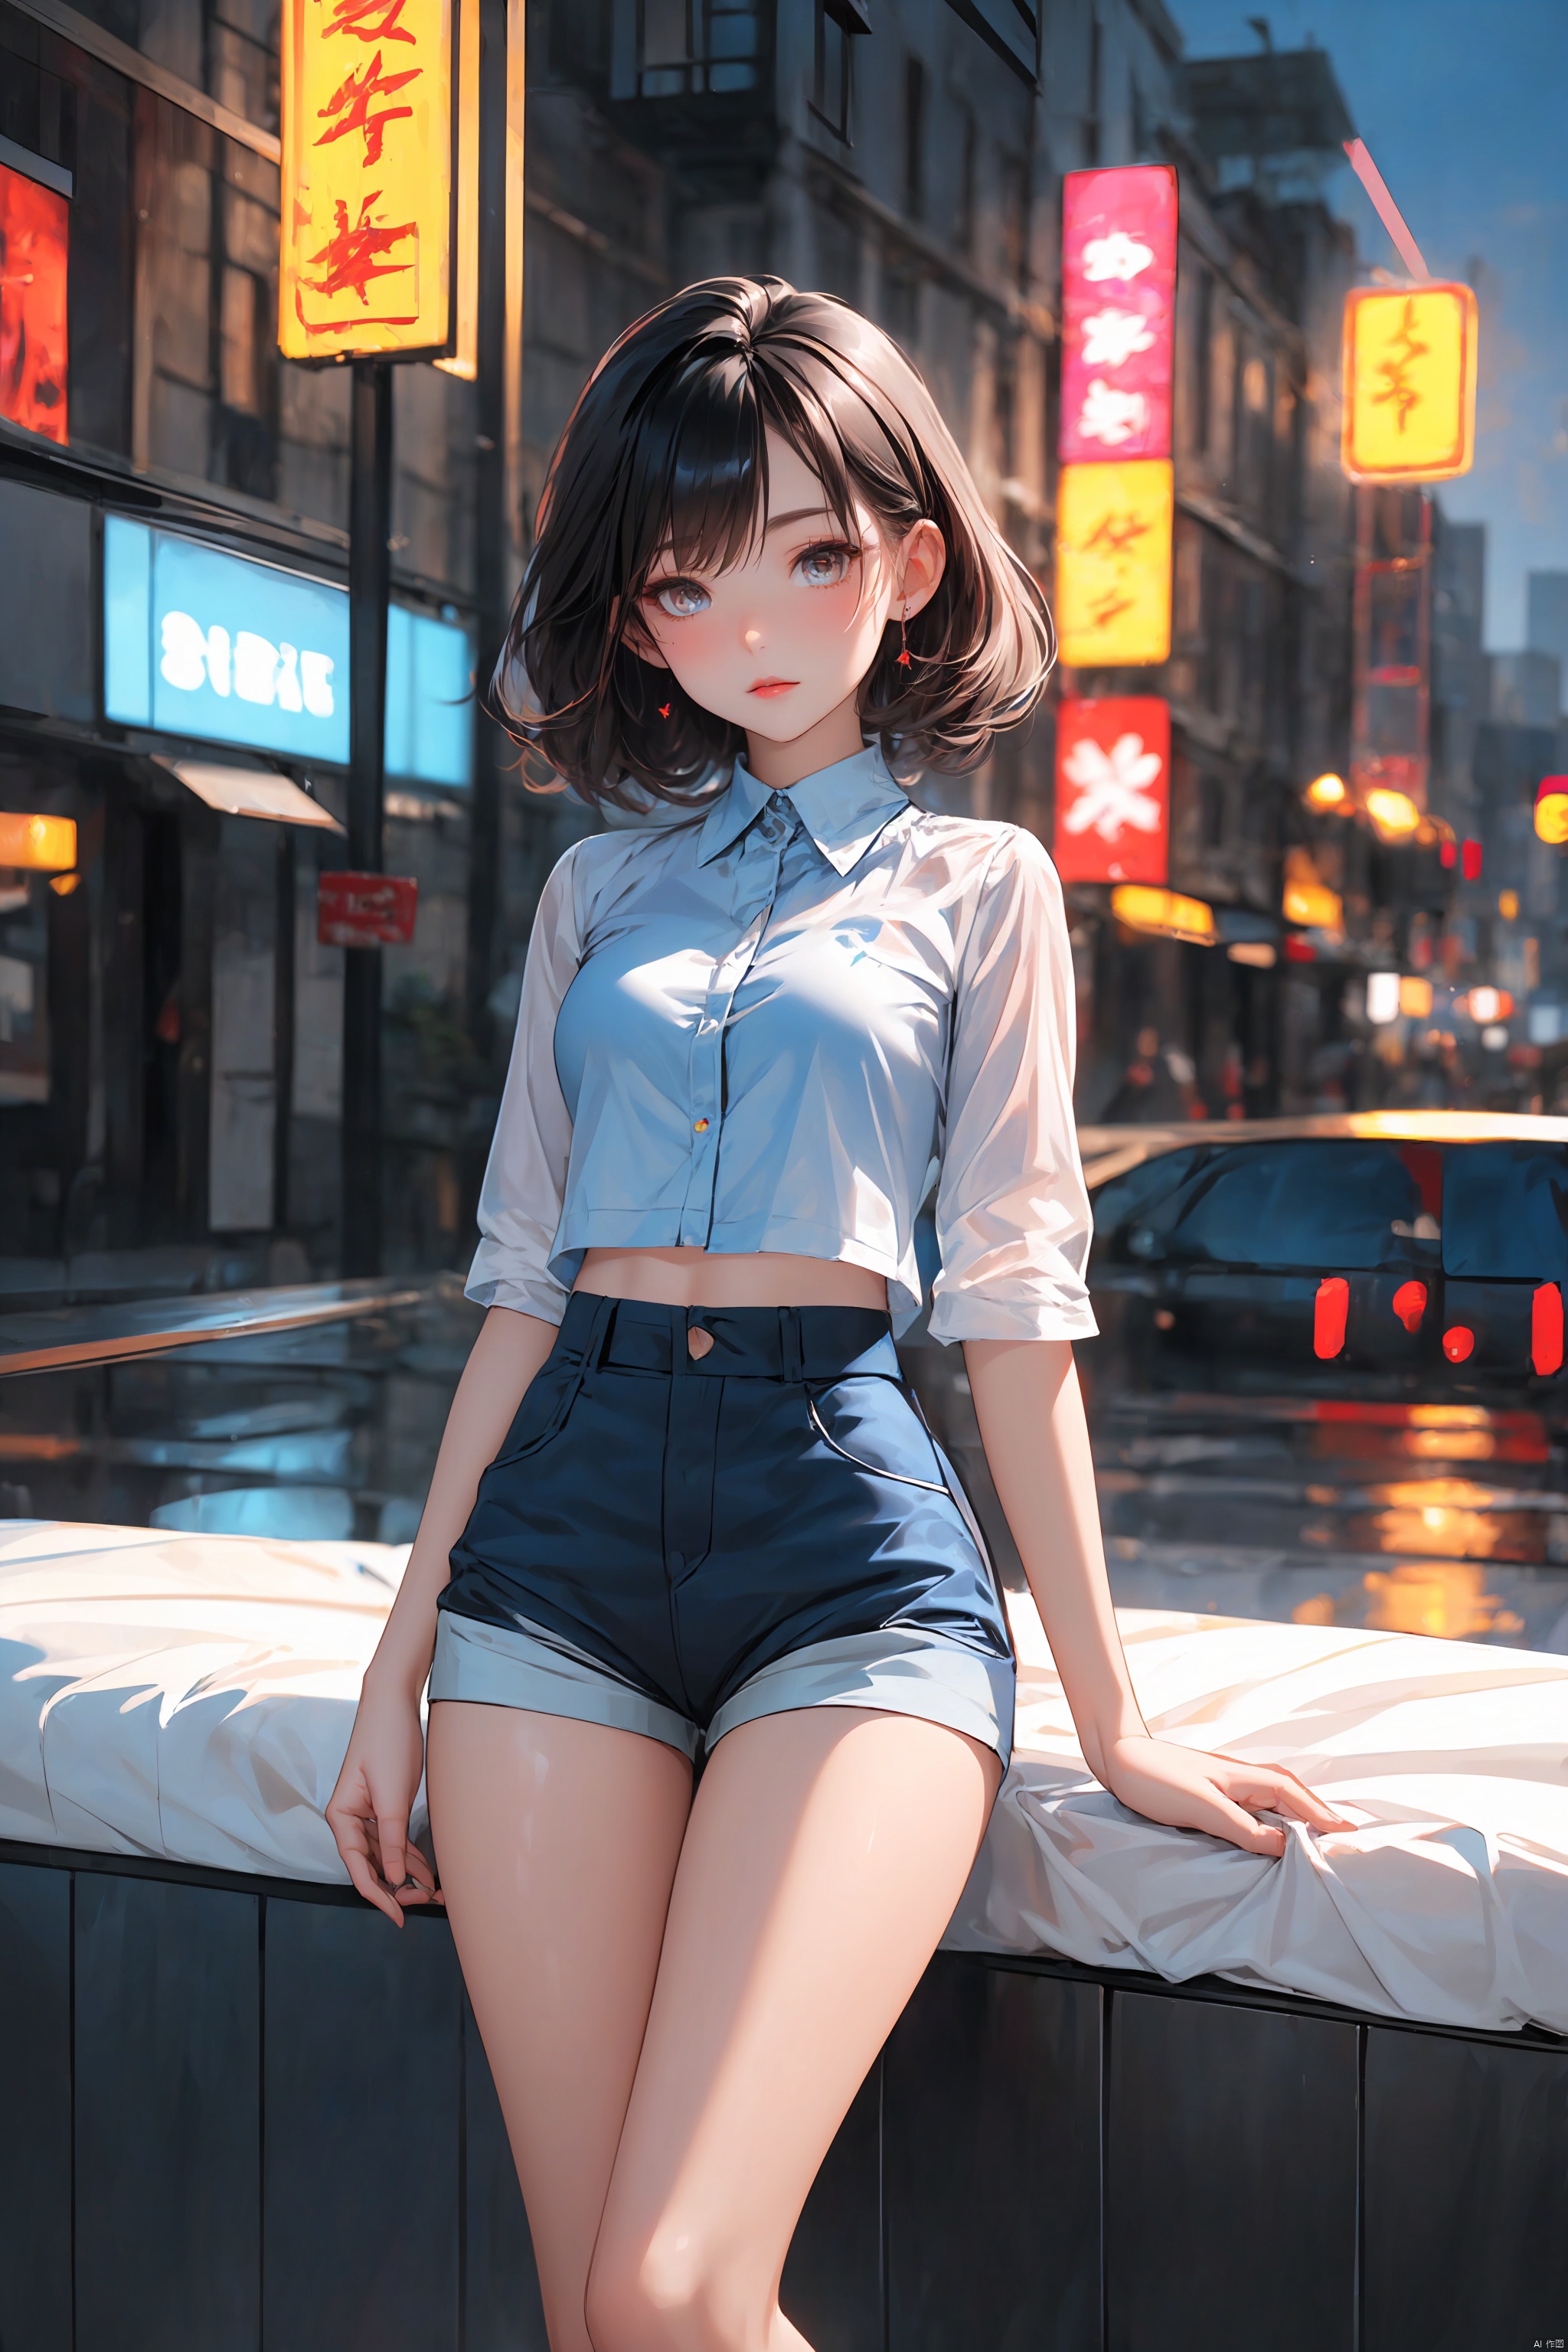  KK-Comic Style, looking at viewer,
bangs,lips, makeup, on bed,
red lips, peach blossom eye, crop_top, 
skirt, night_sky, rooftop, city, 
neon lights, highly detailed, 
ultra-high resolutions, 32K UHD,
best quality, masterpiece,
partiallysubmerged, flower, airbubble, ((poakl))

1girl\((bishoujo), (lovely face:1.4), (reddish black hair:1.4), (browneyes:1.4), (small breast:1.3), (straight_hair:1.4), (short_hair:1.4), plump_*****, long_legs, sharp_eyelid, black eyeliner, black eyelashes, reddish eyeshadow,
(perfect detailed face), (pink lipgloss:1.3), (perfect hands)\),
blue Ultra-thin transparent, (silver Ultra-thin transparent mech:1.3), (all blue color scheme:1.4),  

(short shorts:1.4),